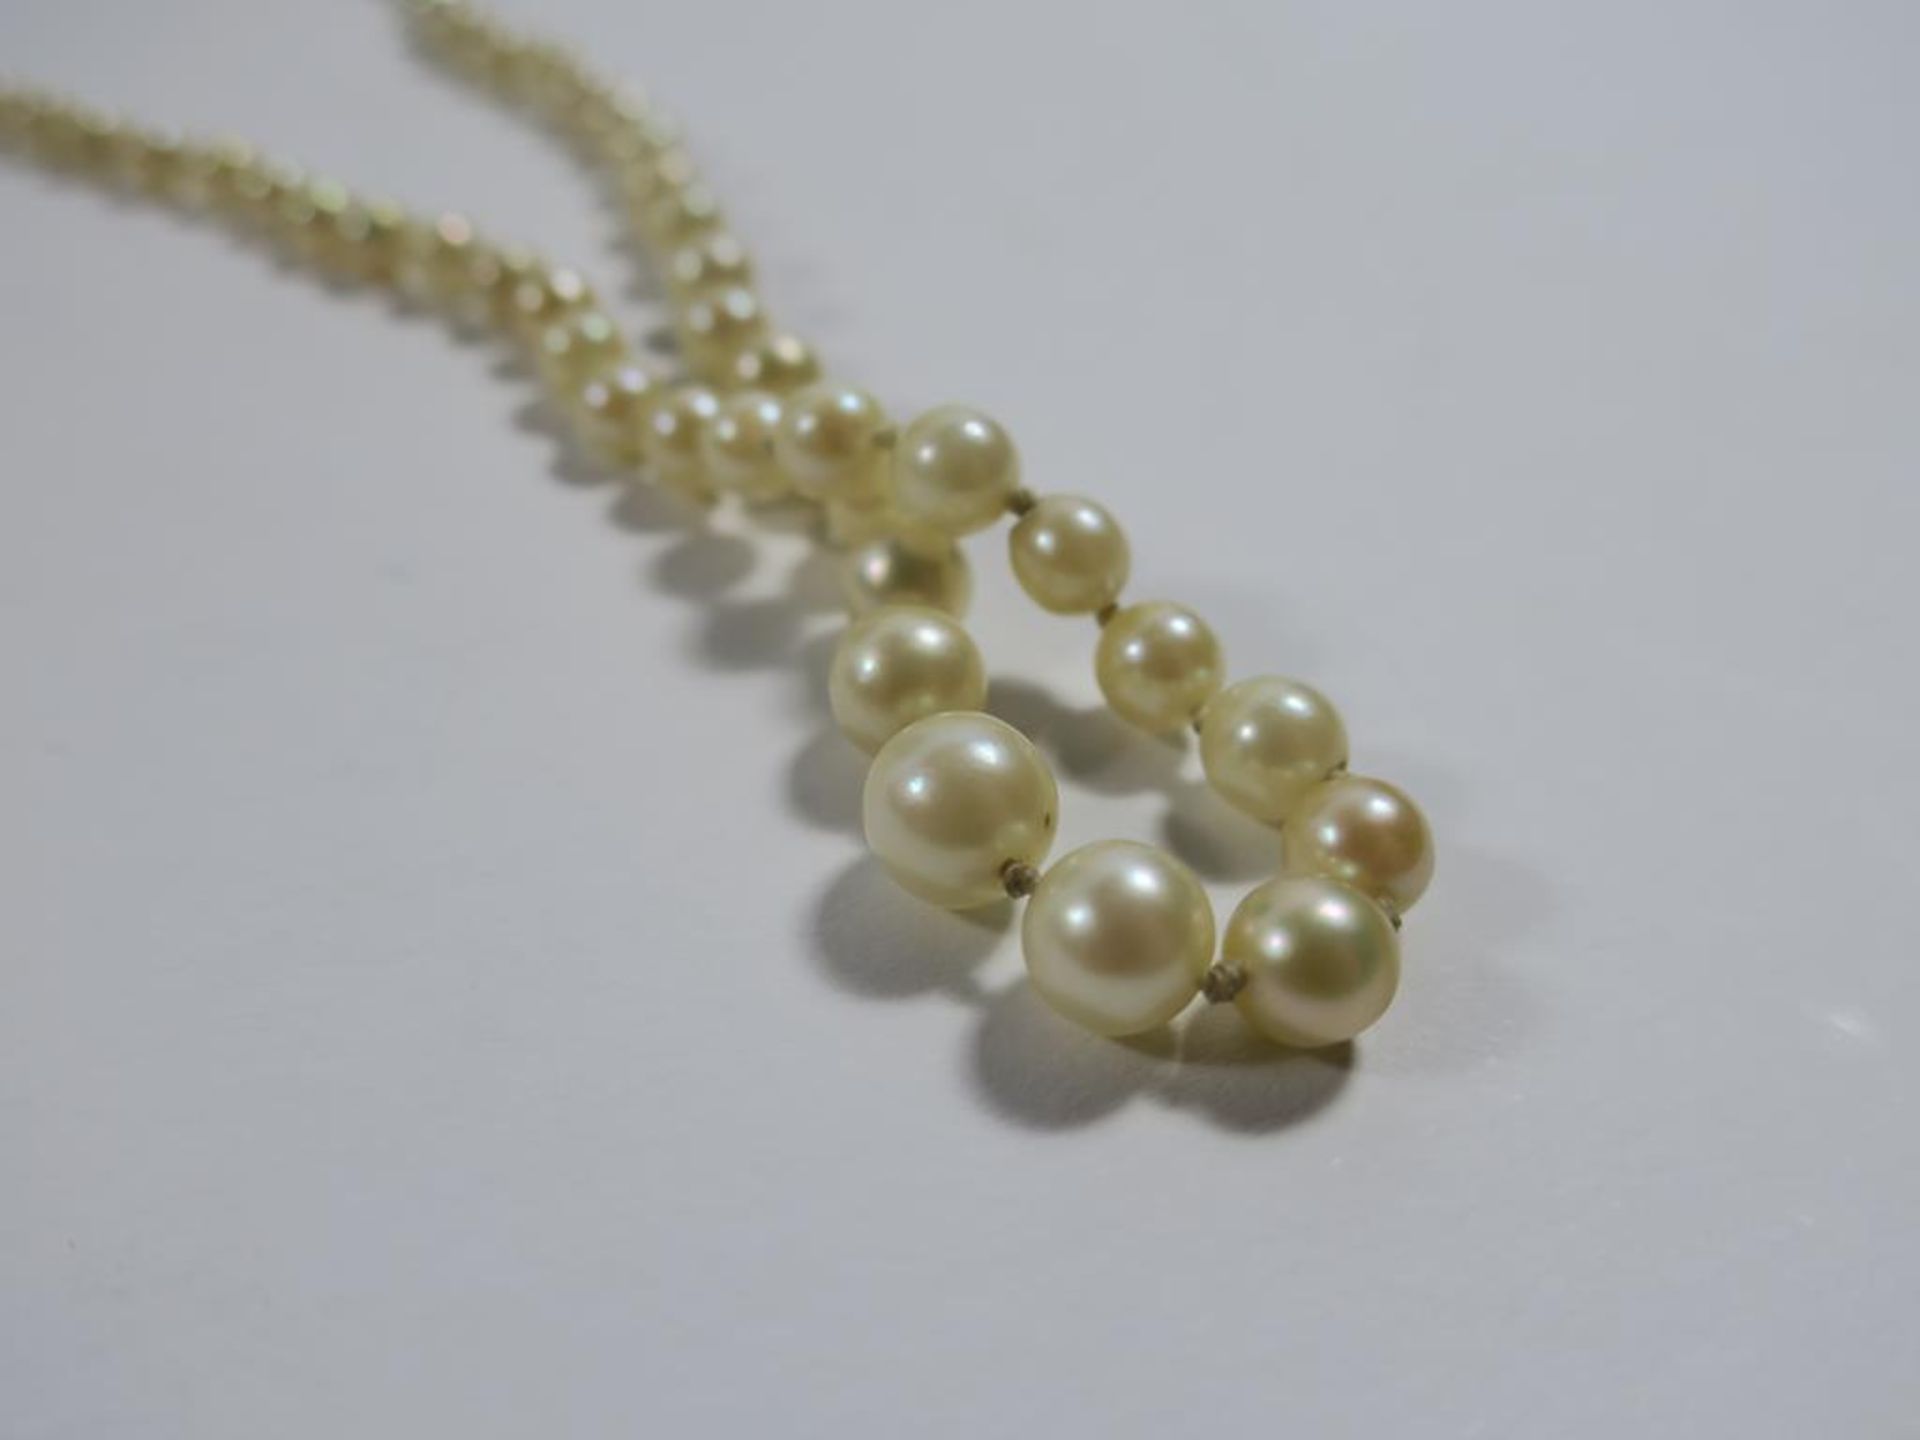 A Stringed Pearl Necklace with Silver coloured and Gemstone Clasp. (Est £20-£50) - Image 4 of 5